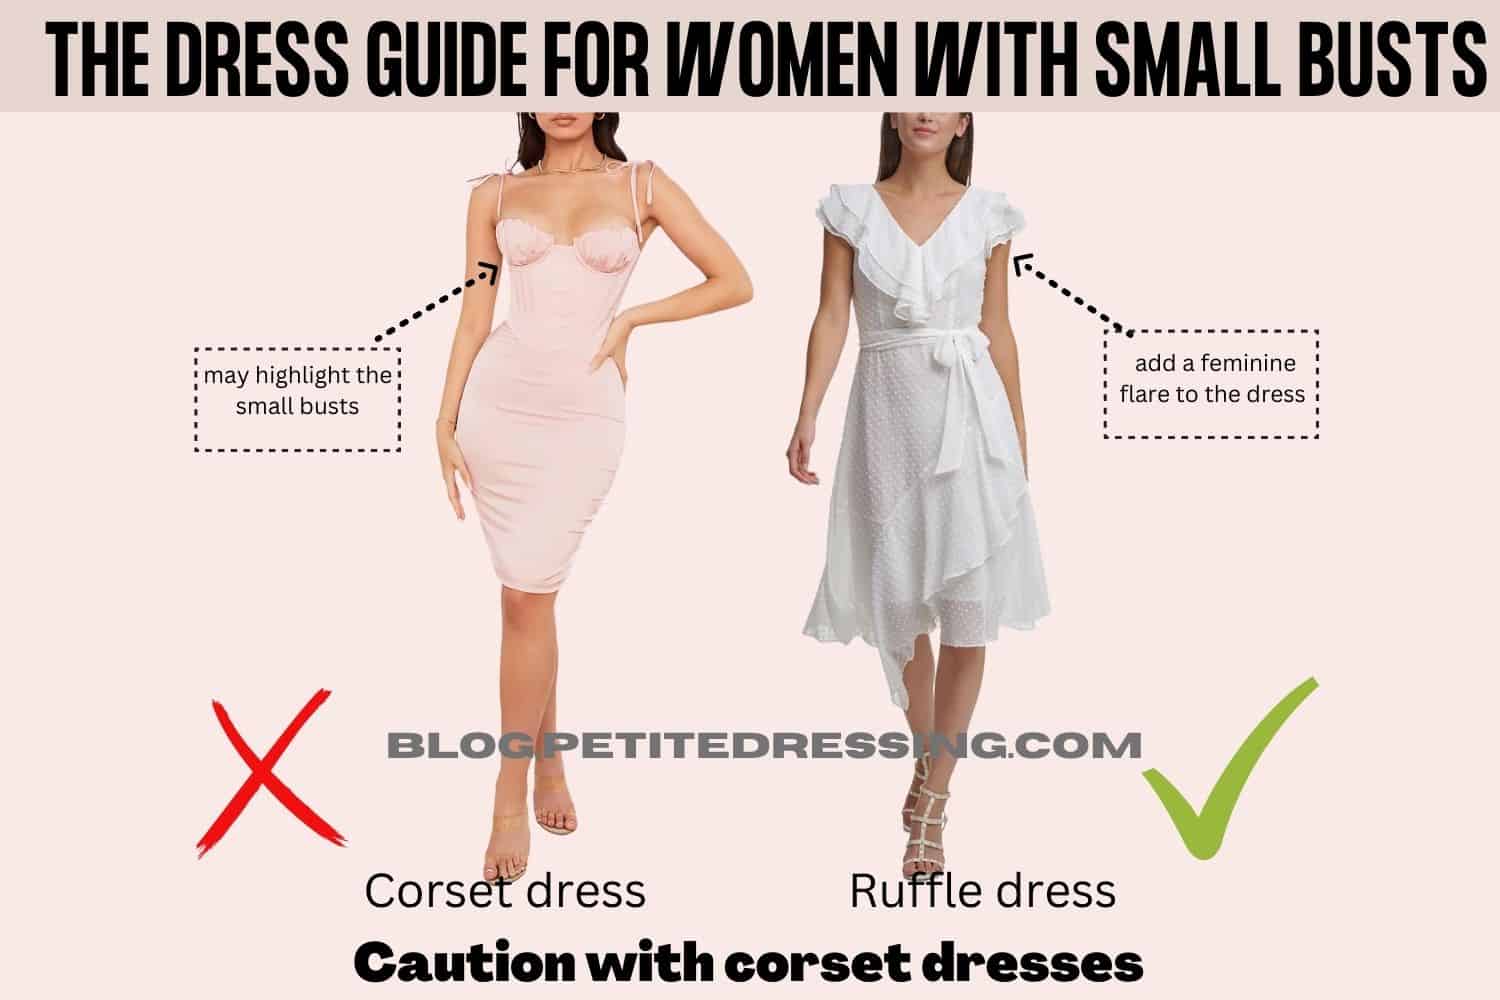 The Dress Guide for Women With Small Busts-Caution with corset dresses